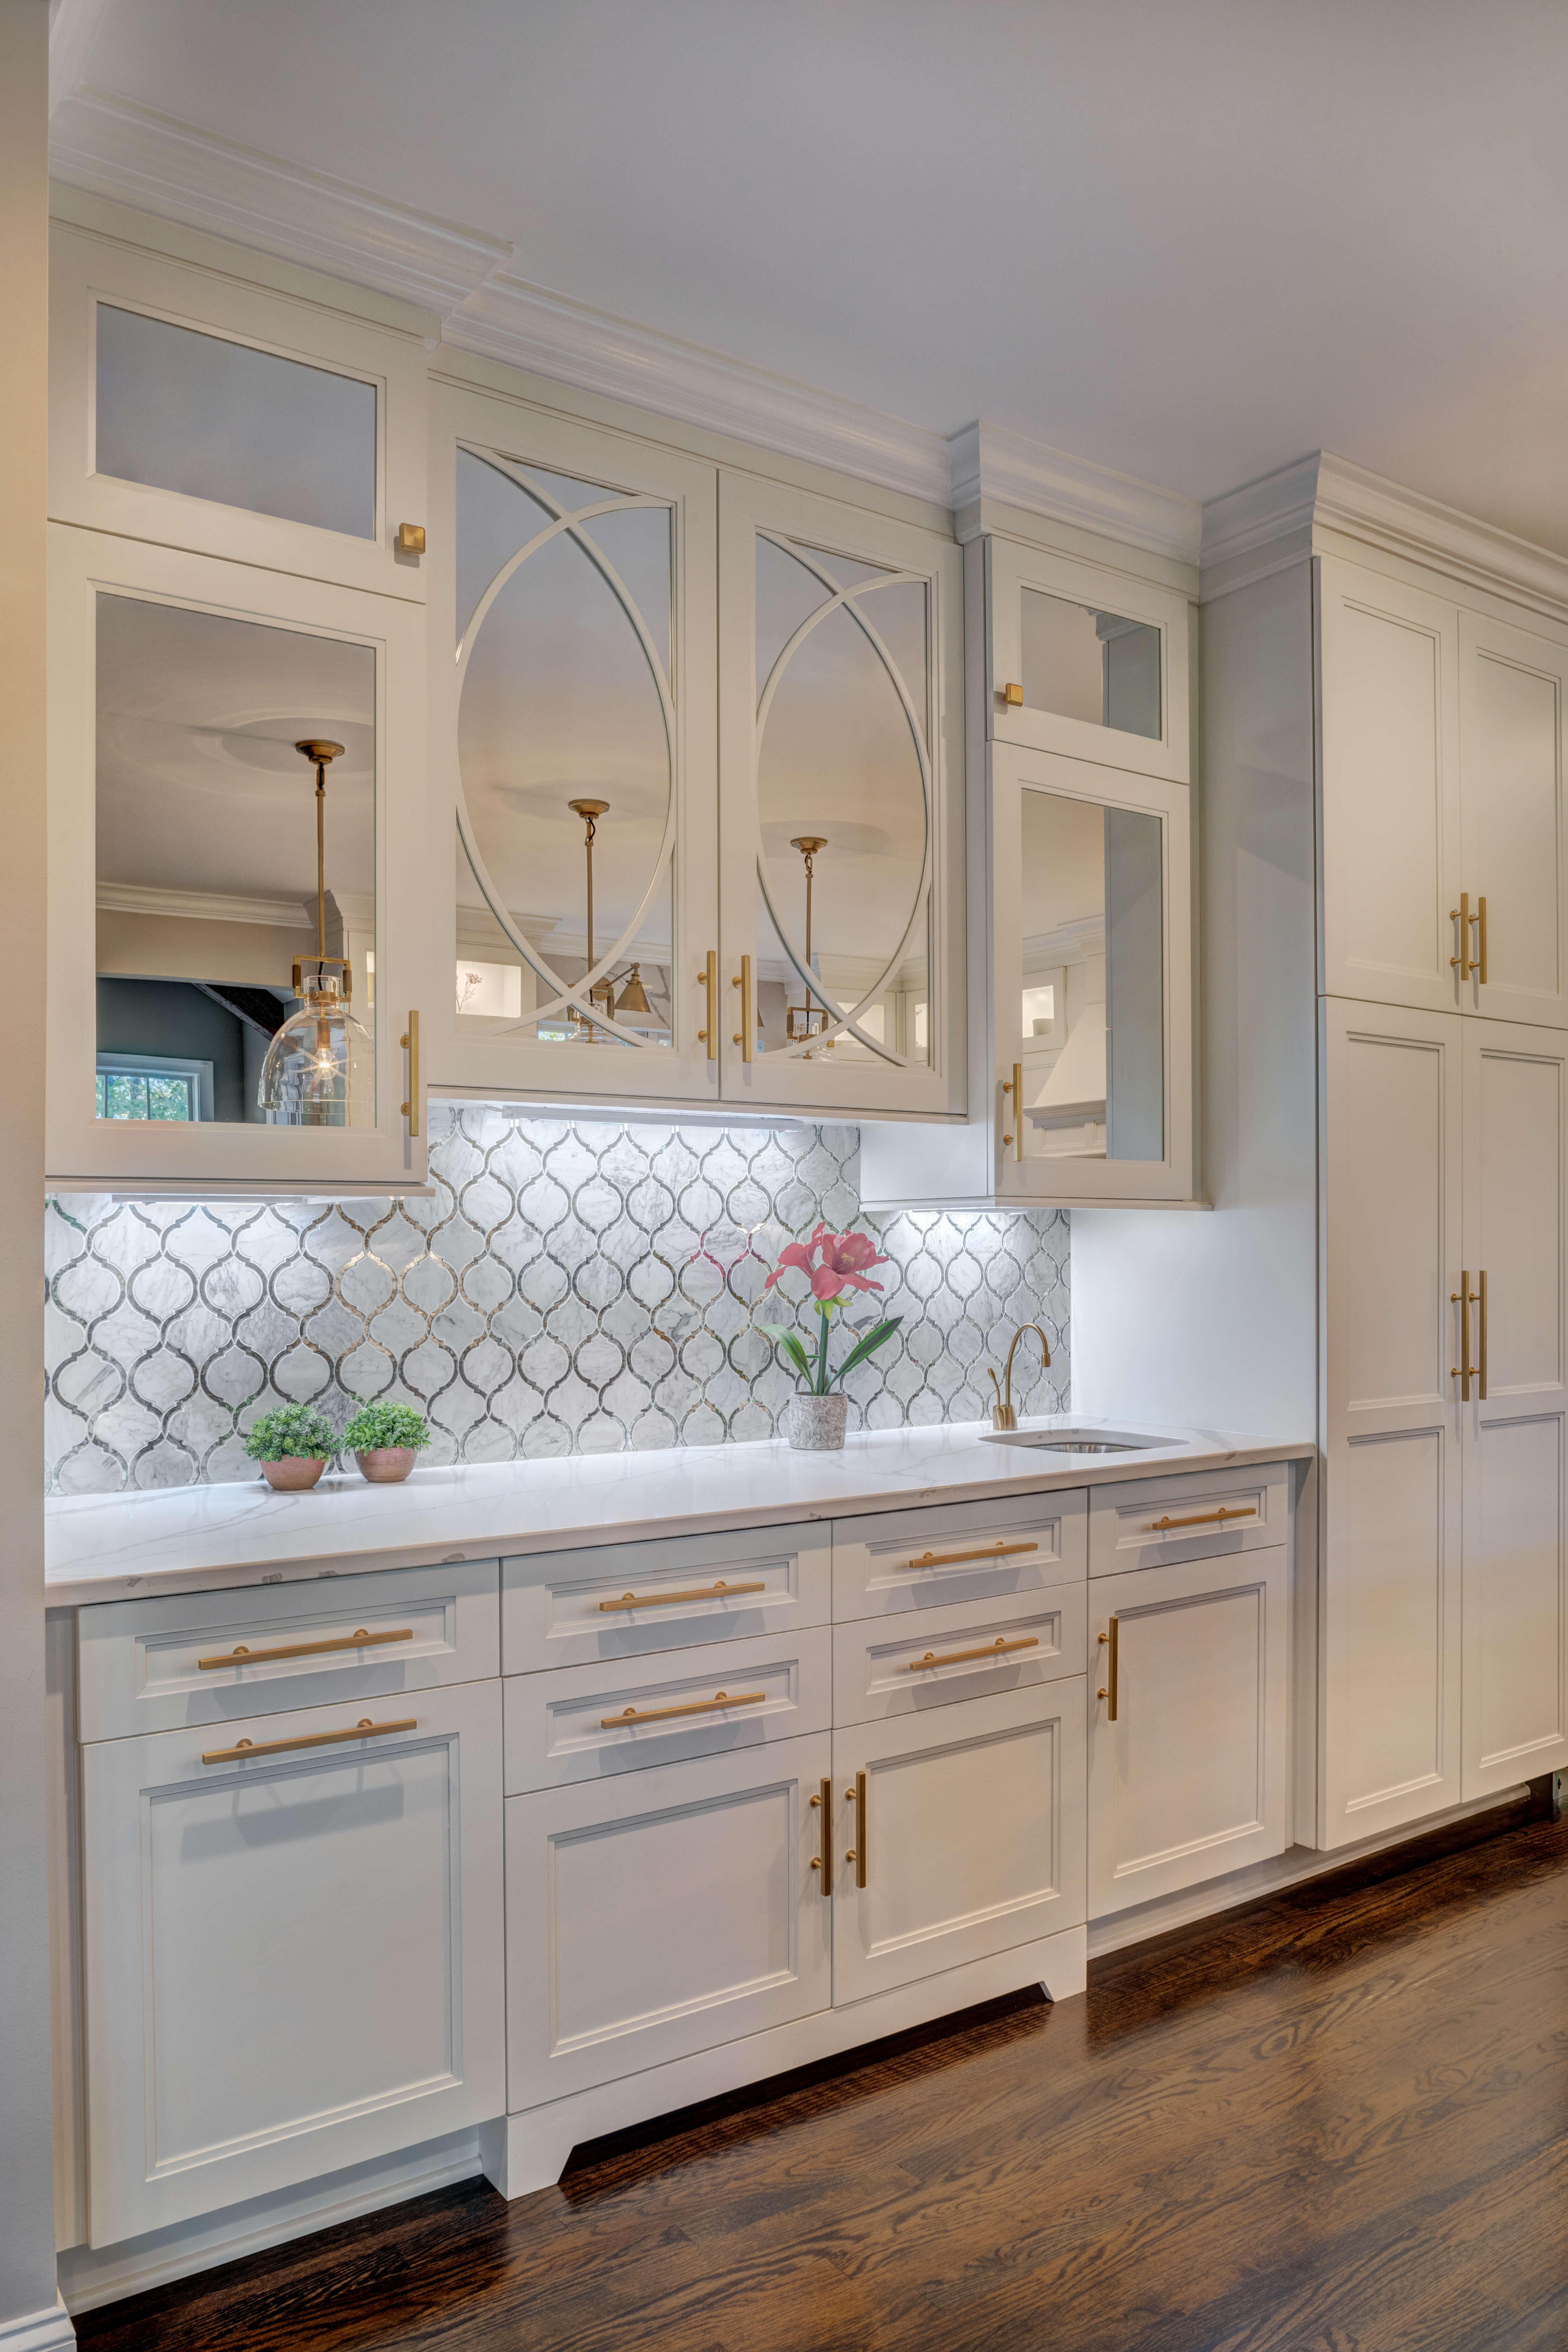 The glass cabinet doors in this white painted kitchen feature mirror inserts add an open airy feel to the space, and create the look of glass cabinets while hiding the clutter behind the cabinet doors.